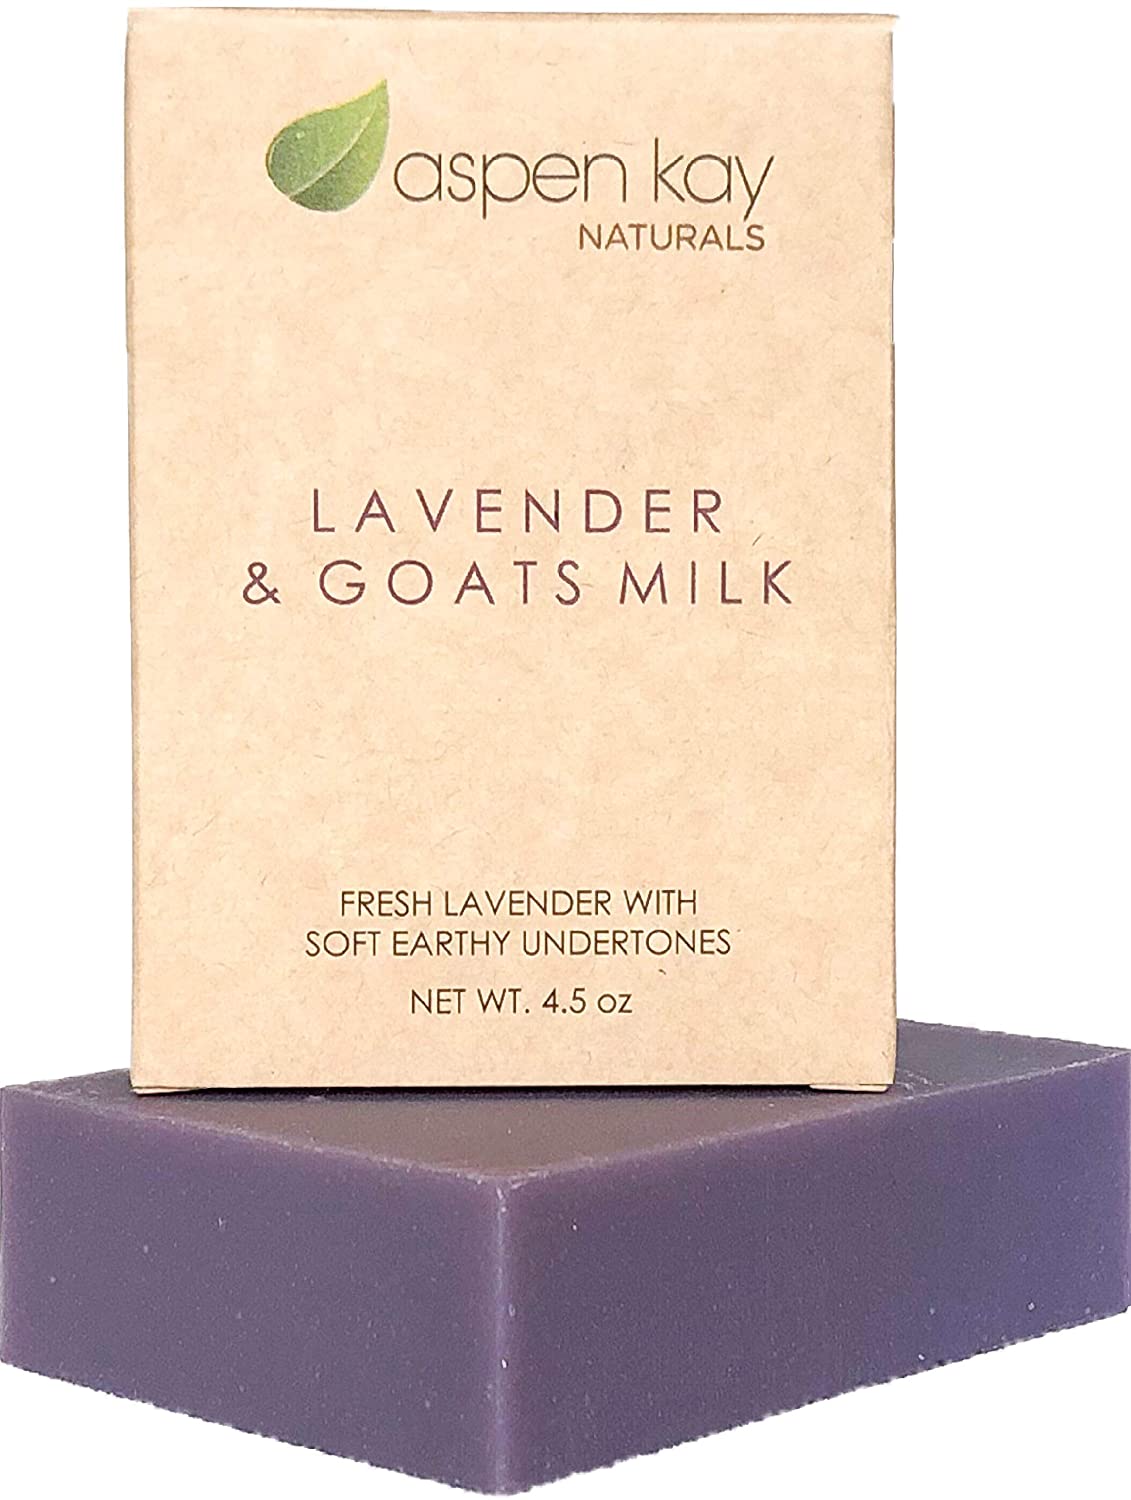 Lavender Goats Milk Soap Bar. Natural and Organic Soap. With Organic Skin Loving Oil. This Soap Makes a Wonderful and Gentle Face Soap or All Over Body Soap. 4oz Bar. 1 Pack - (For 12 piece(s))